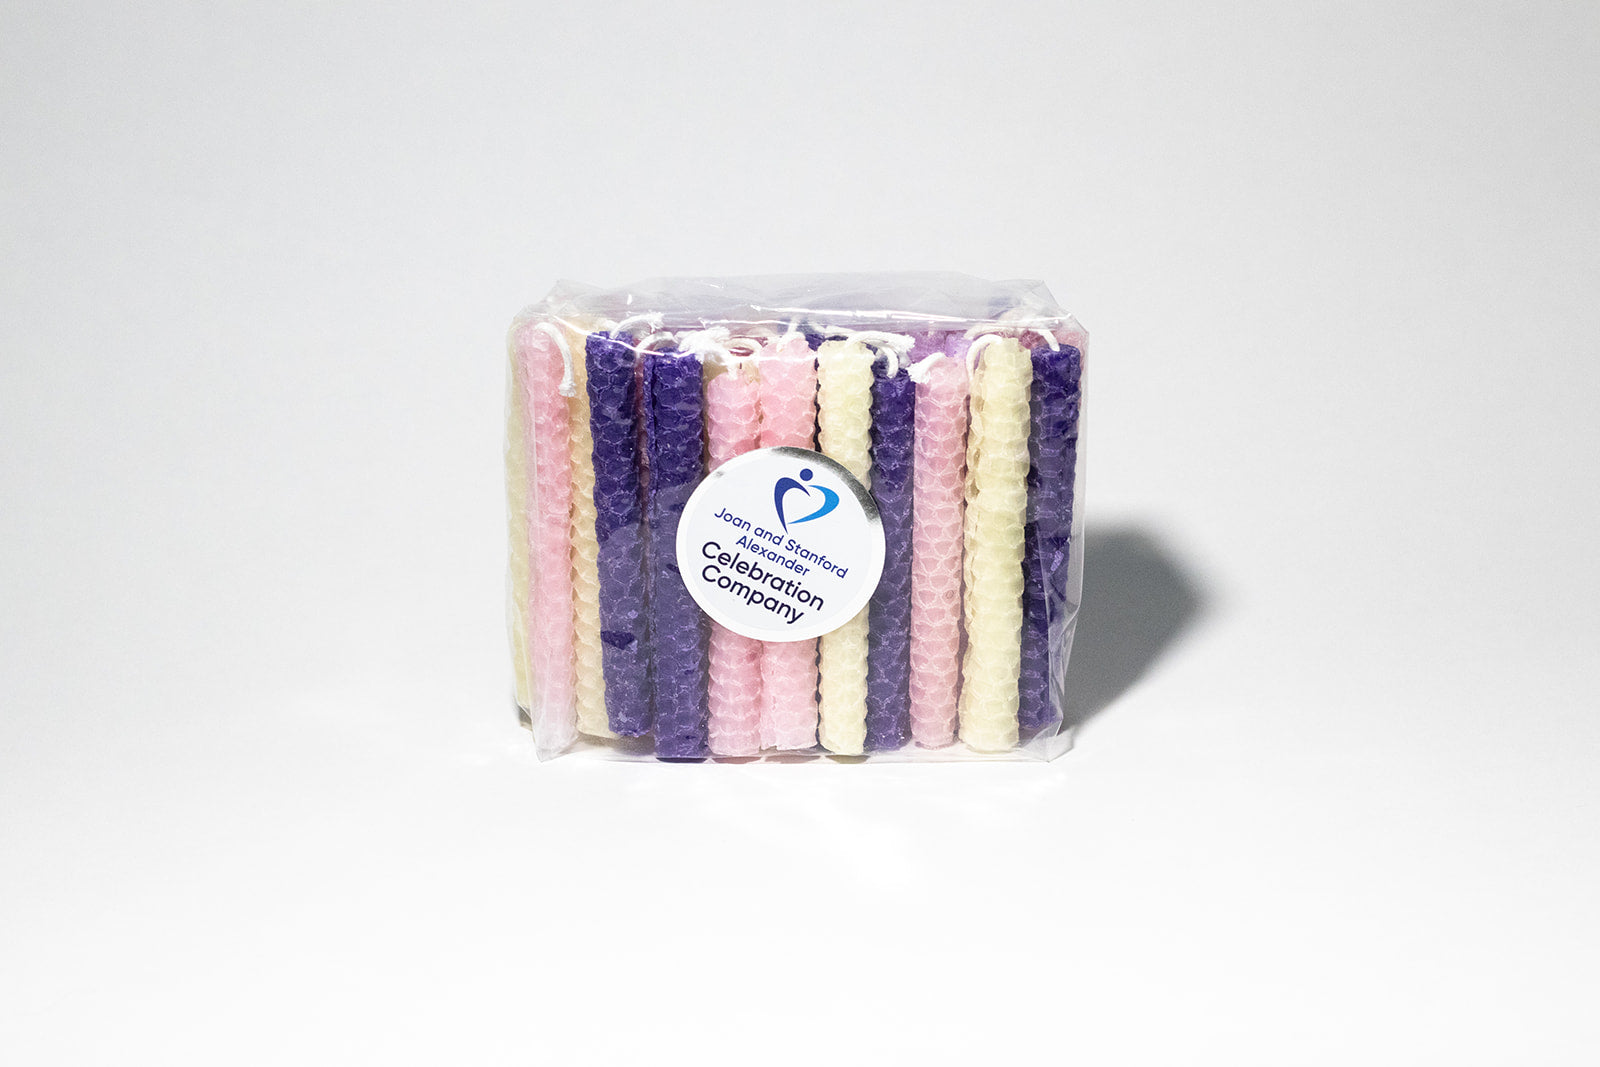 Packaged Princess themed hand-rolled beeswax candles in pink, lavender, purple and yellow